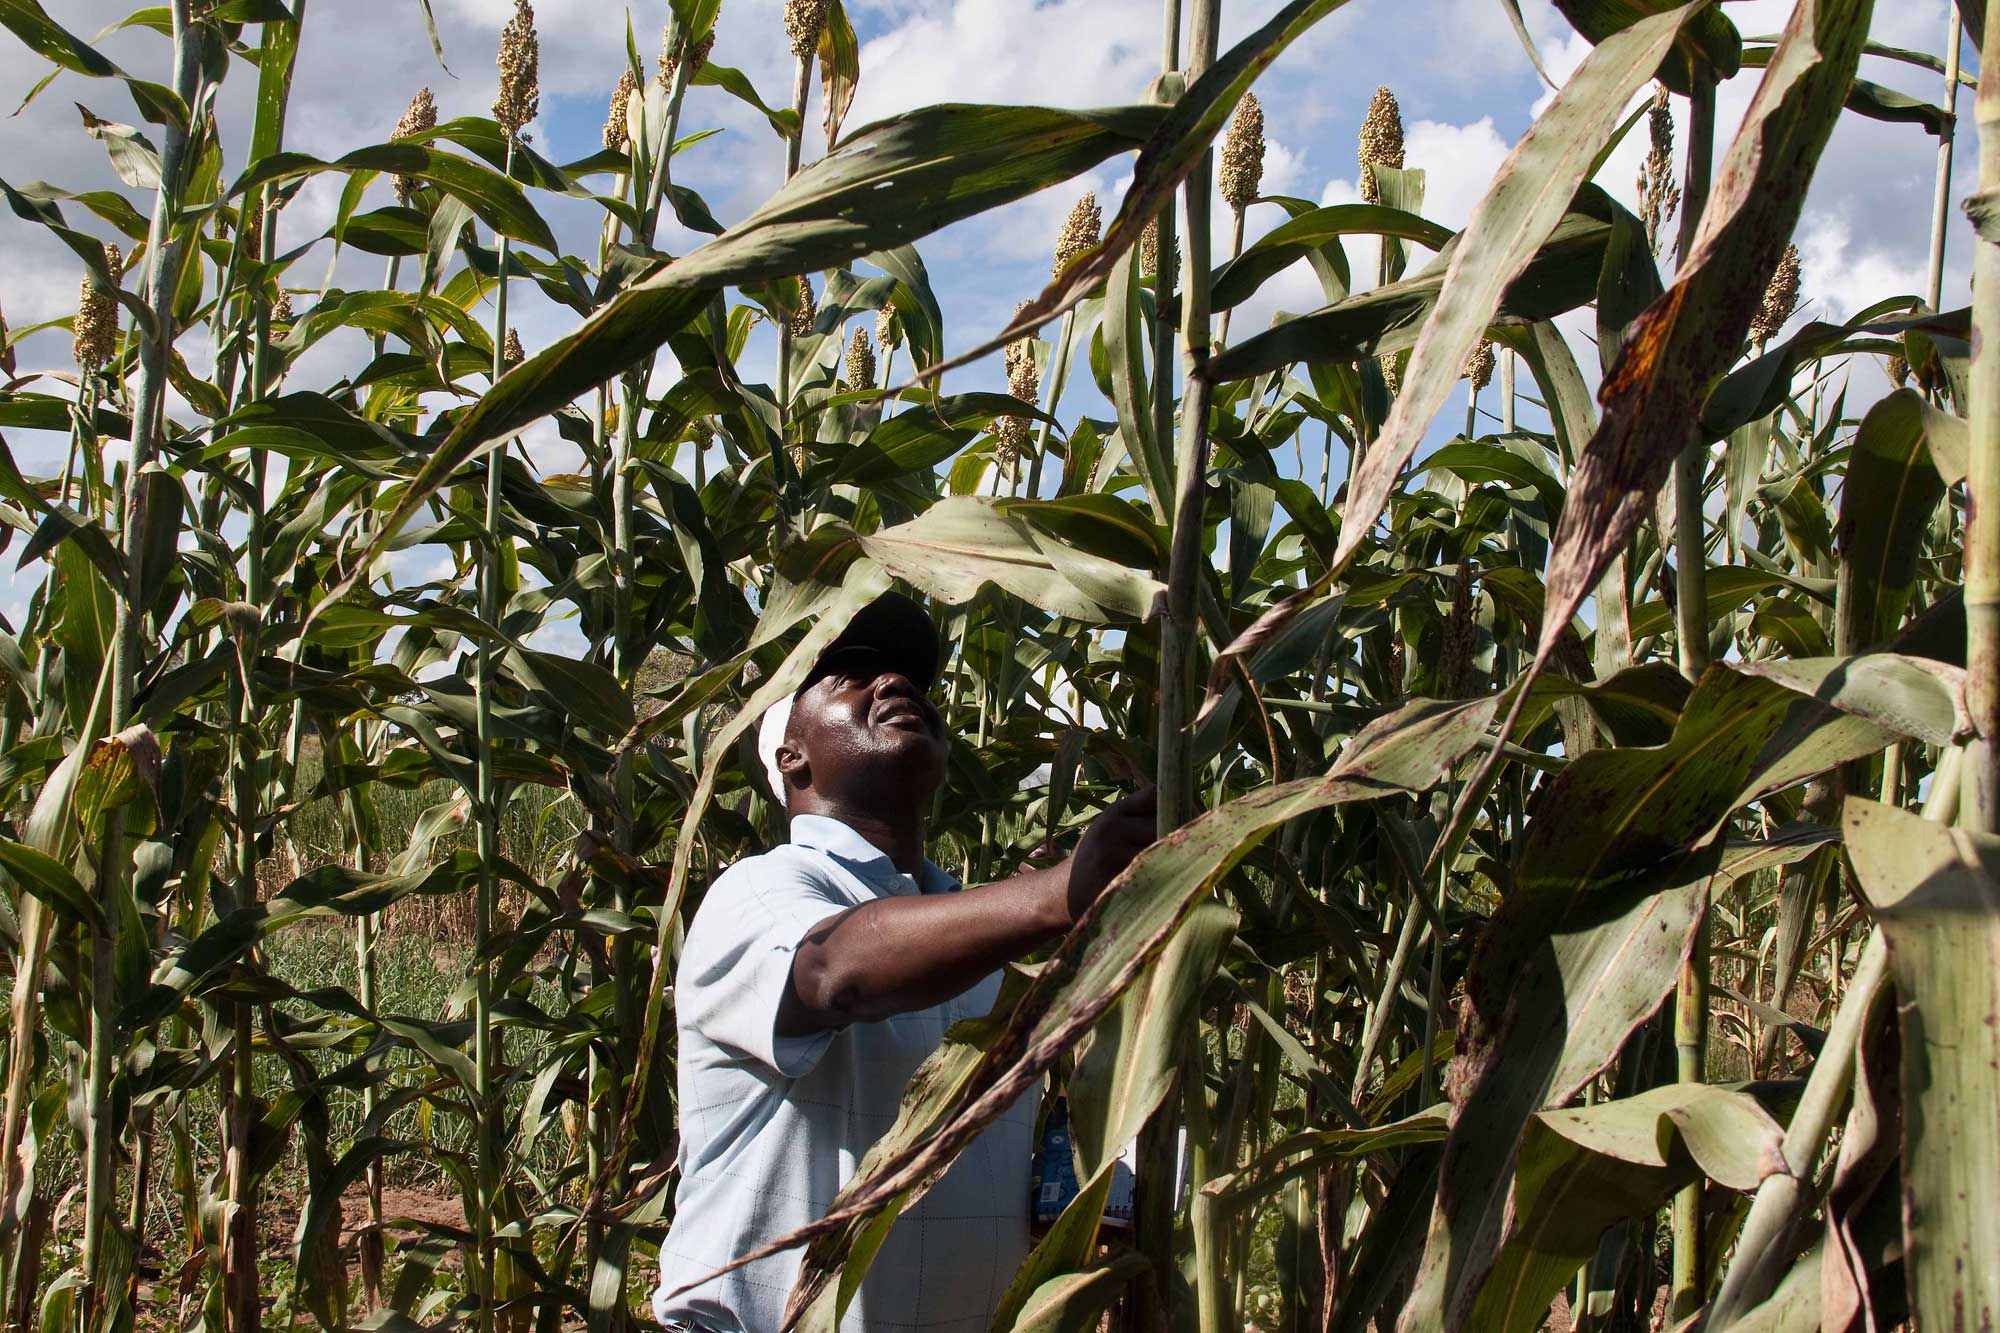 Photograph showing a man inspecting plants in a field of sweet sorghum in Mozambique.